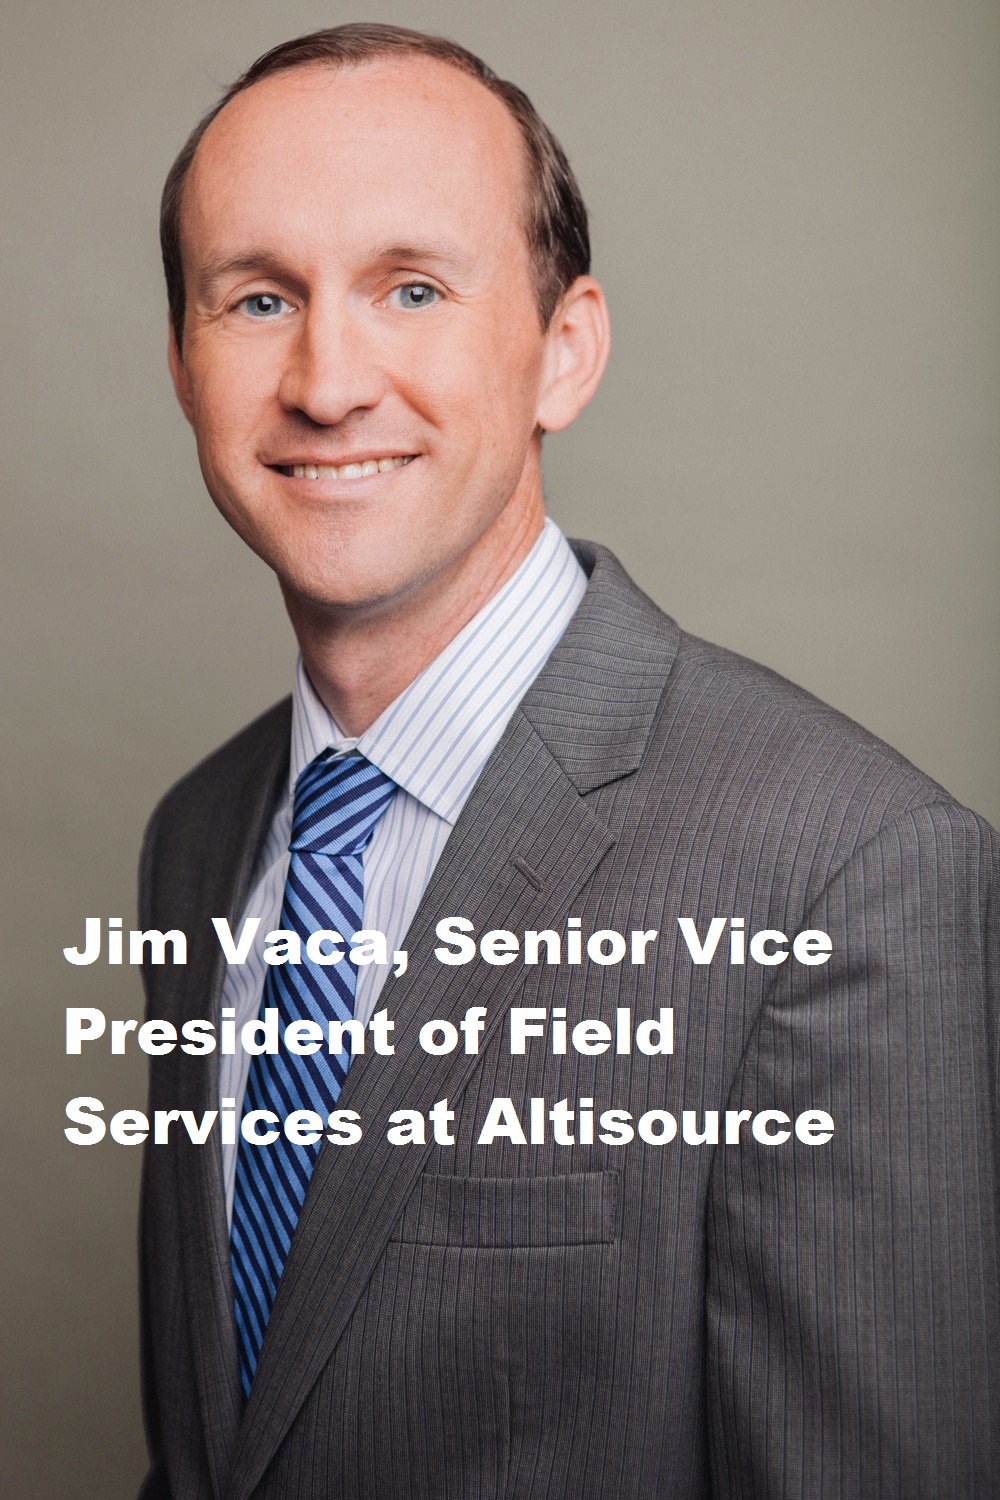 Jim Vaca, senior vice president of field services at Altisource